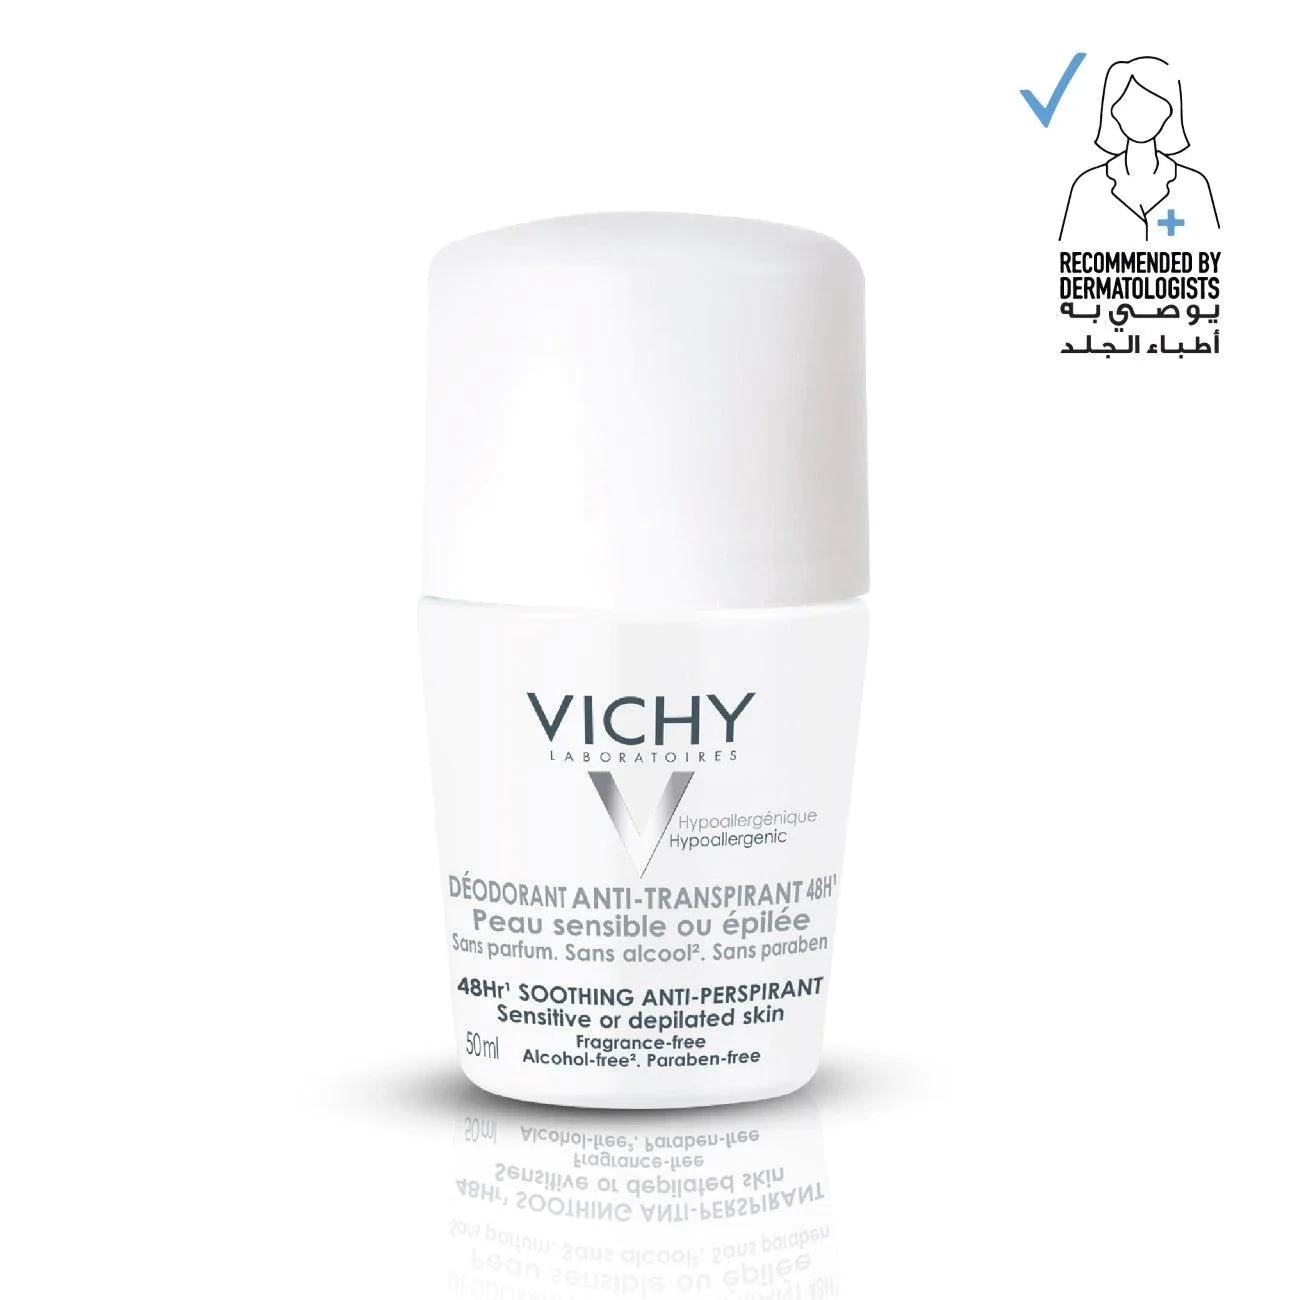 VICHY - 48H Soothing Anti-Perspirant Roll-On - Sensitive or Depilated Skin